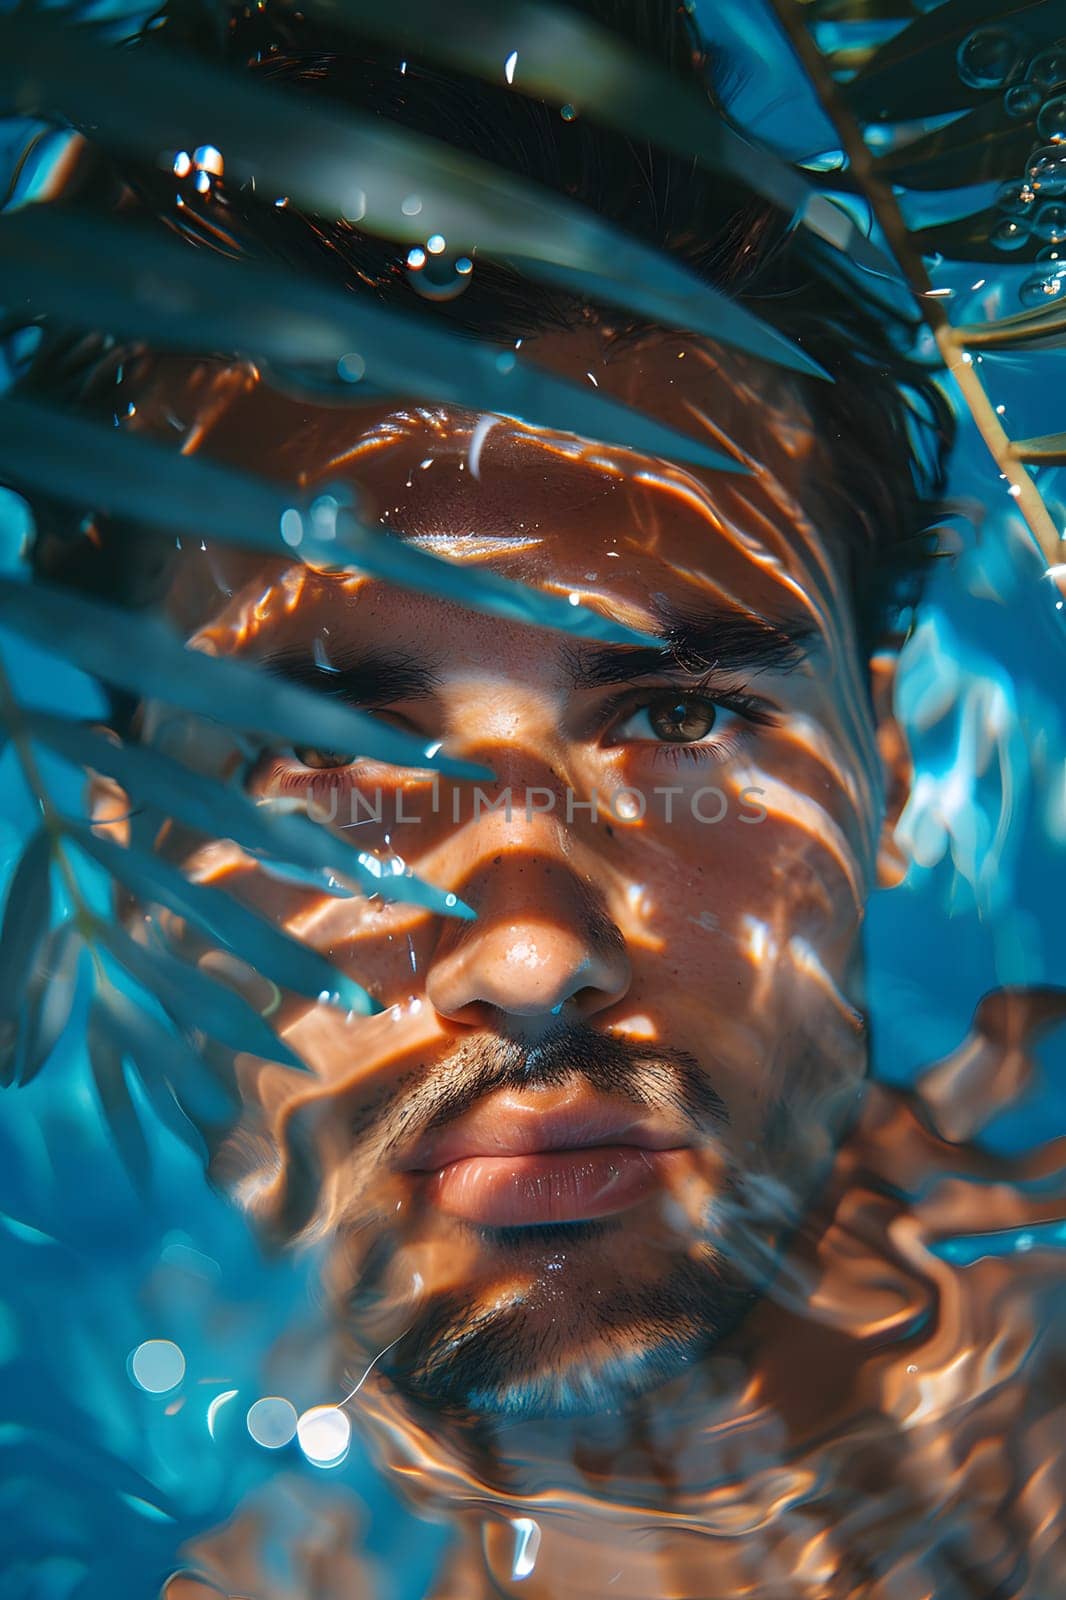 Man swims underwater with palm leaf mask in electric blue liquid by Nadtochiy